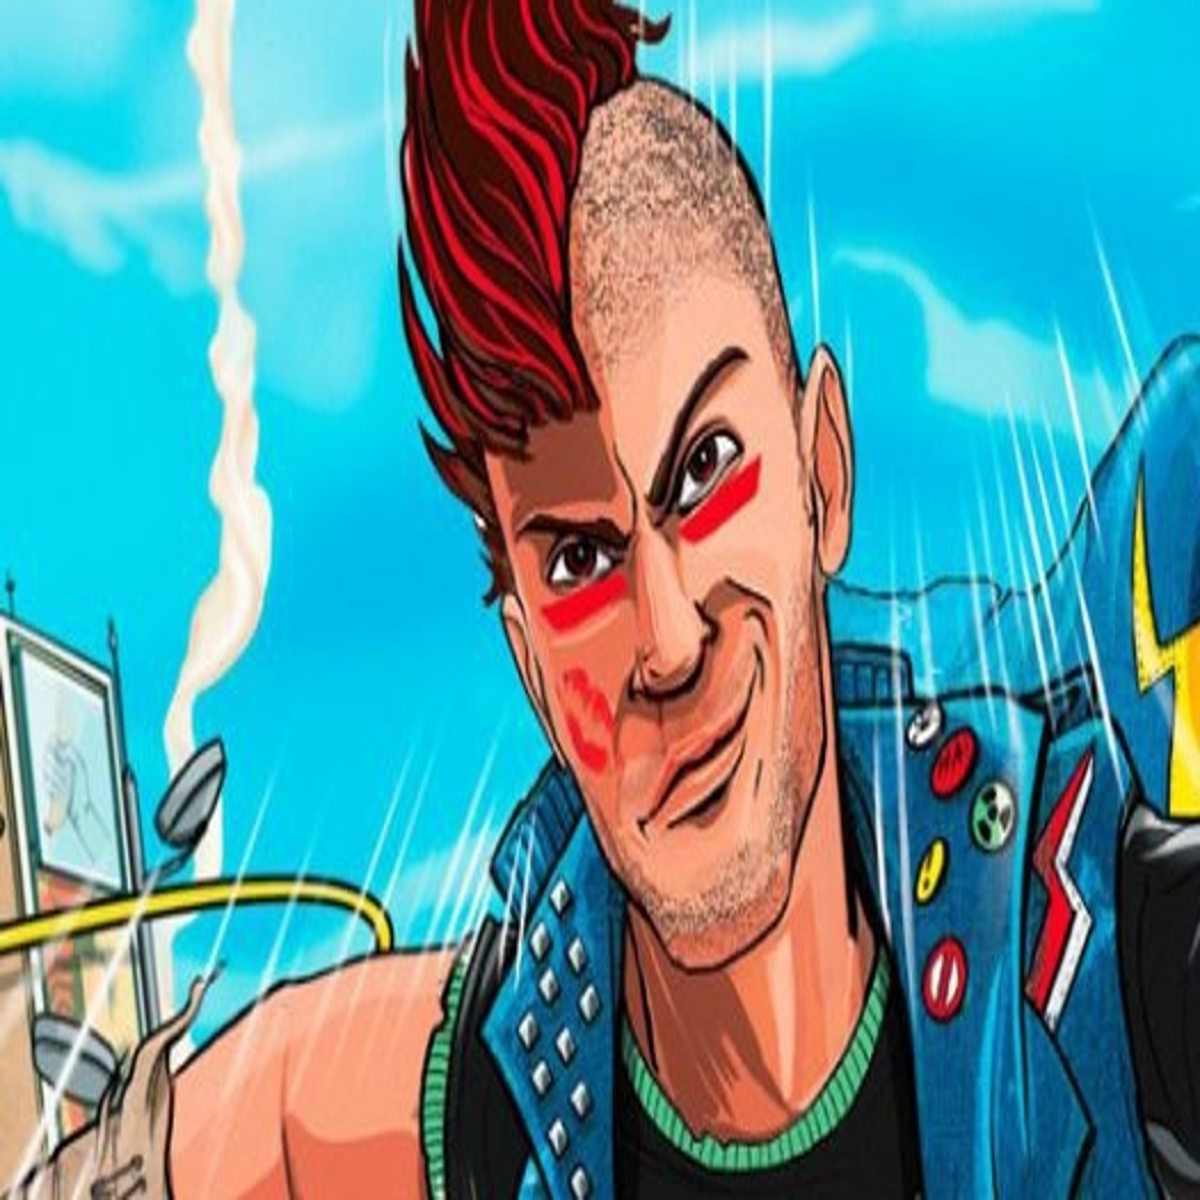 Sunset Overdrive launches today on PC